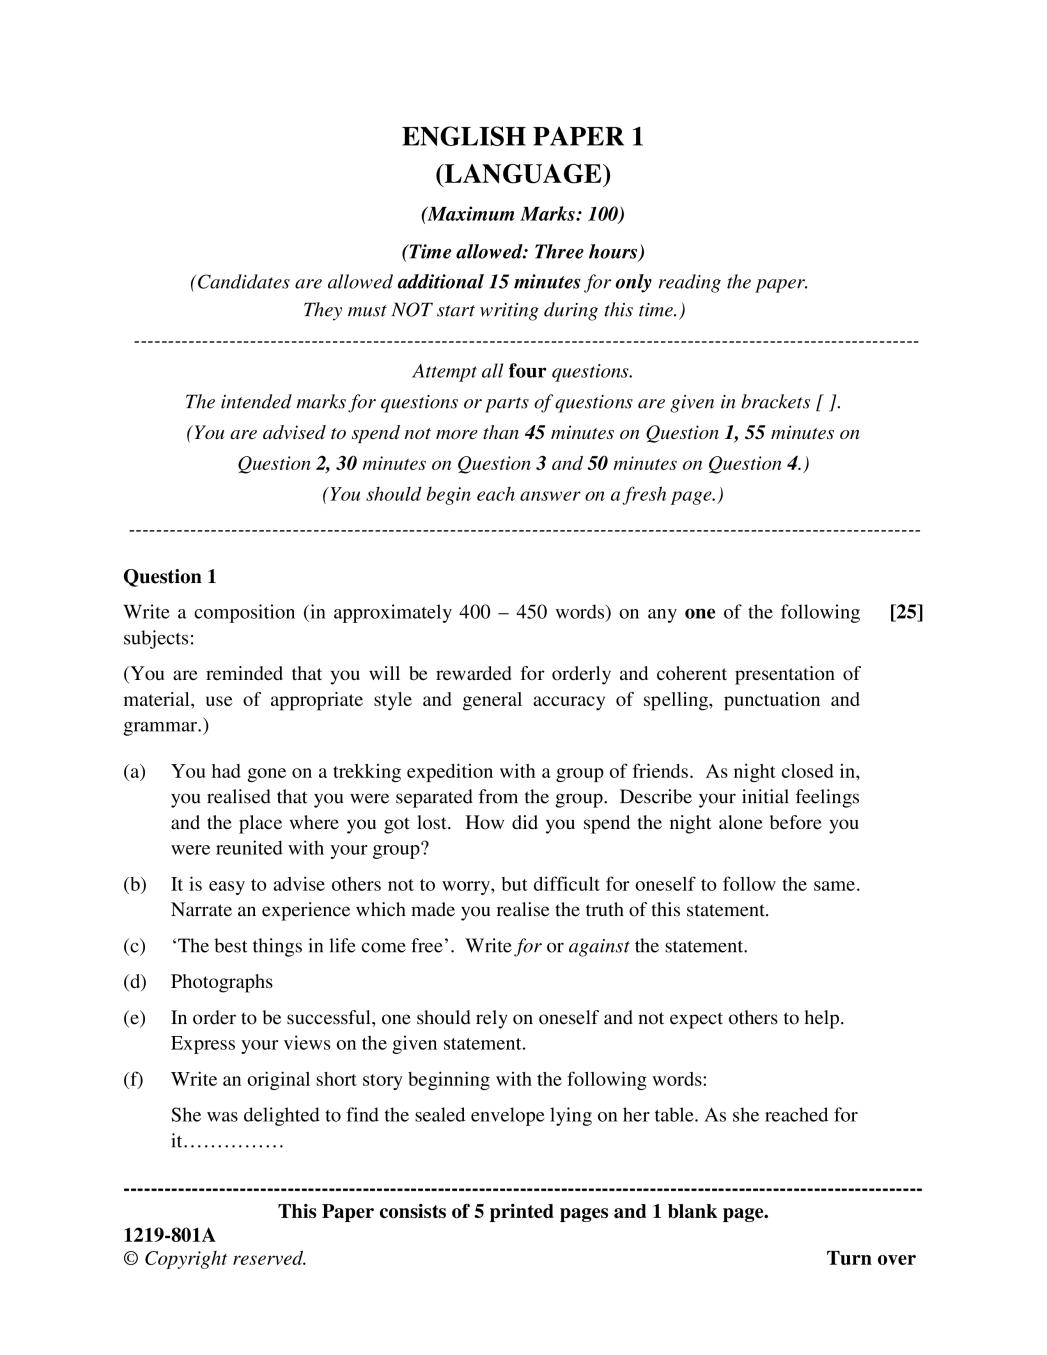 ISC Class 12 Question Paper 2019 for English Paper 1 - Page 1